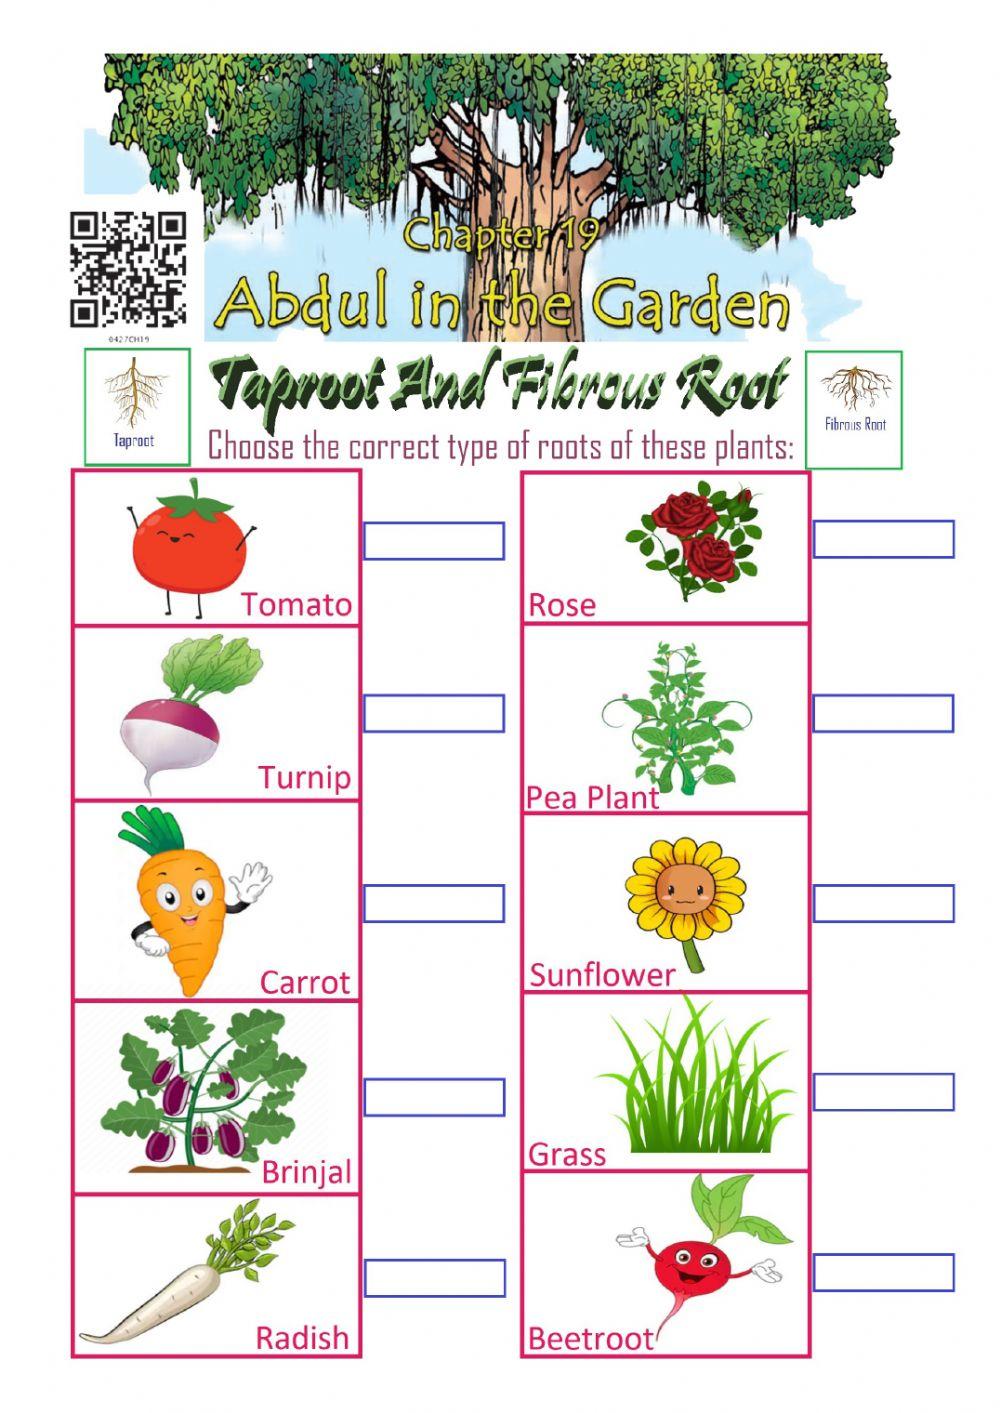 Abdul in the Garden: Taproot and Fibrous Root